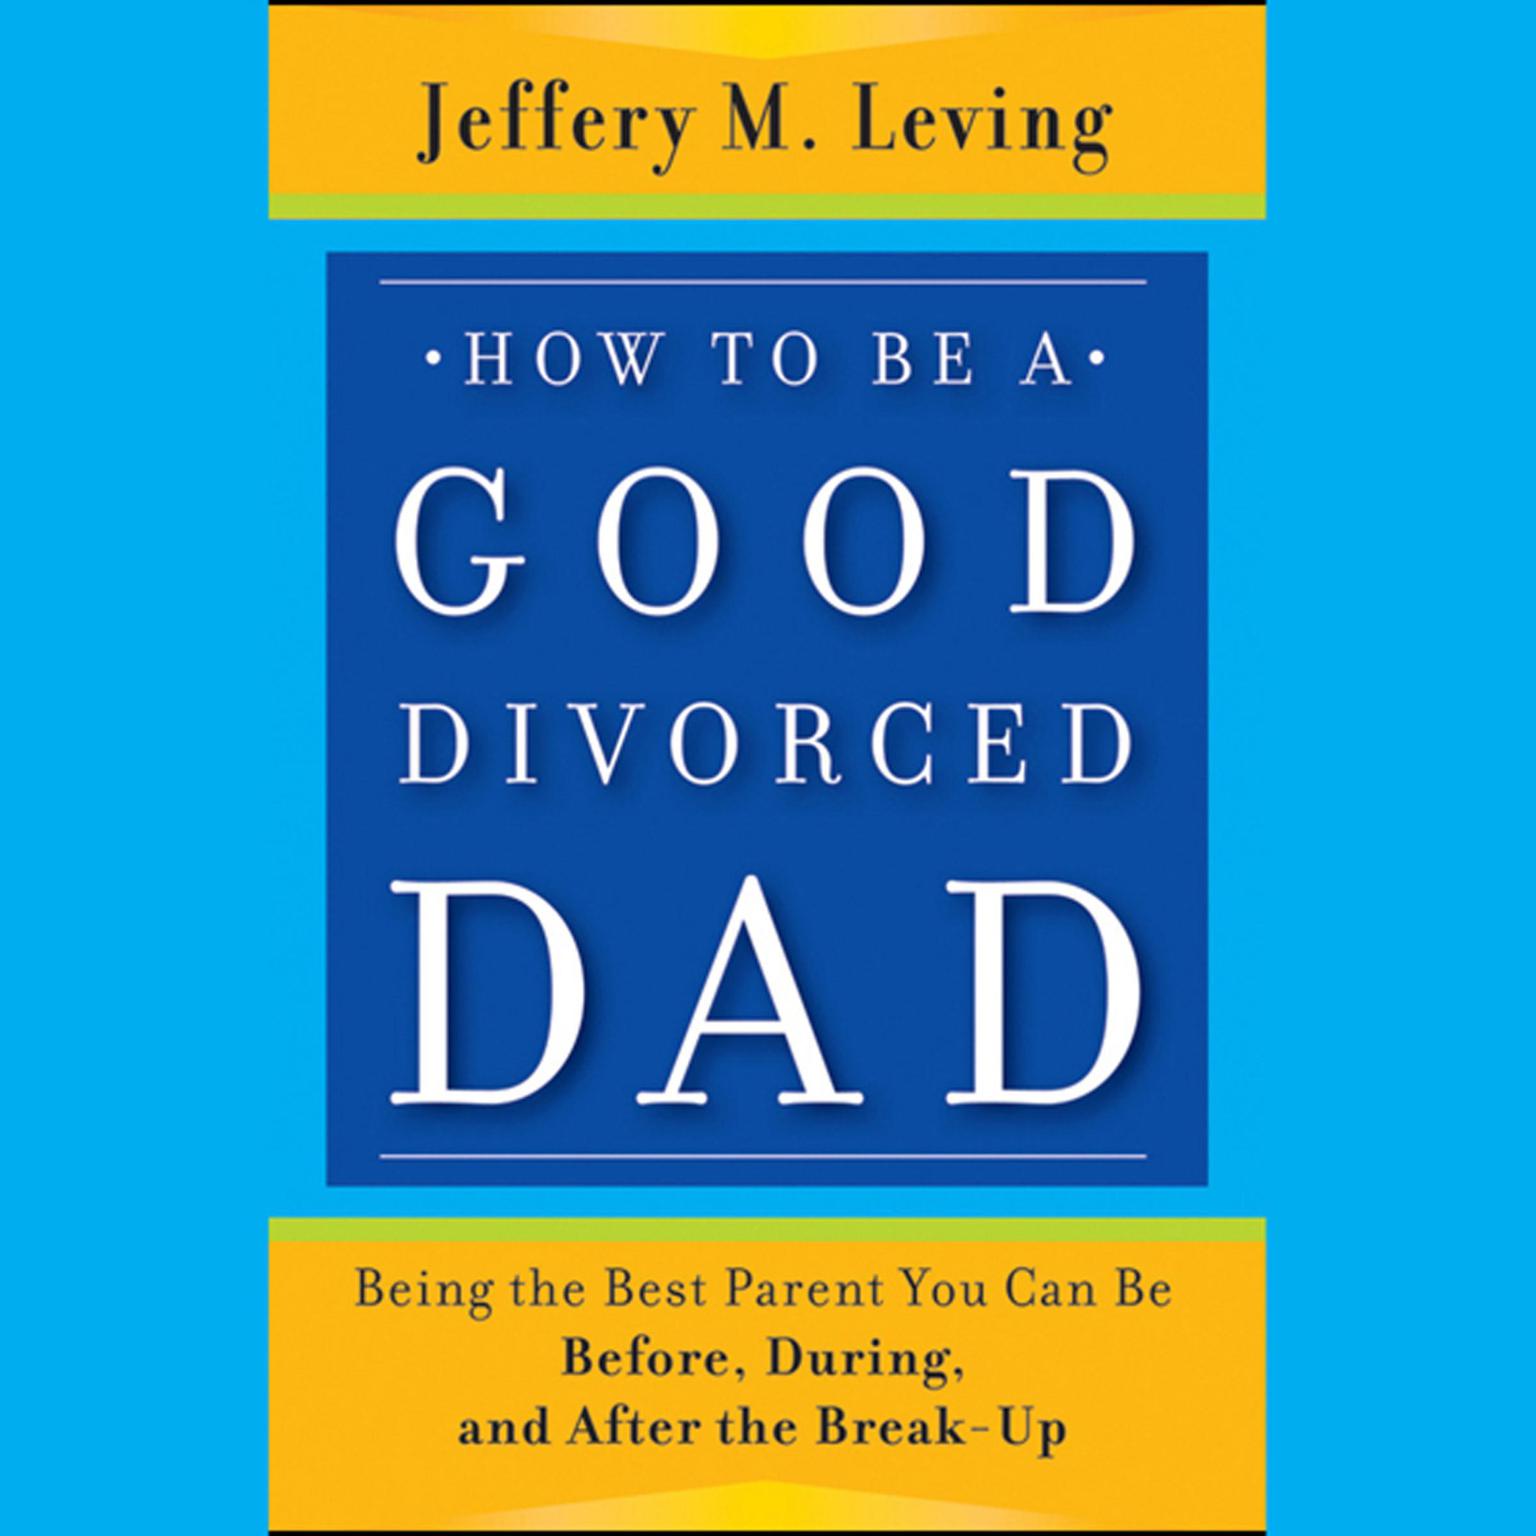 How to be a Good Divorced Dad: Being the Best Parent You Can Be Before, During and After the Break-Up Audiobook, by Jeffery M. Leving